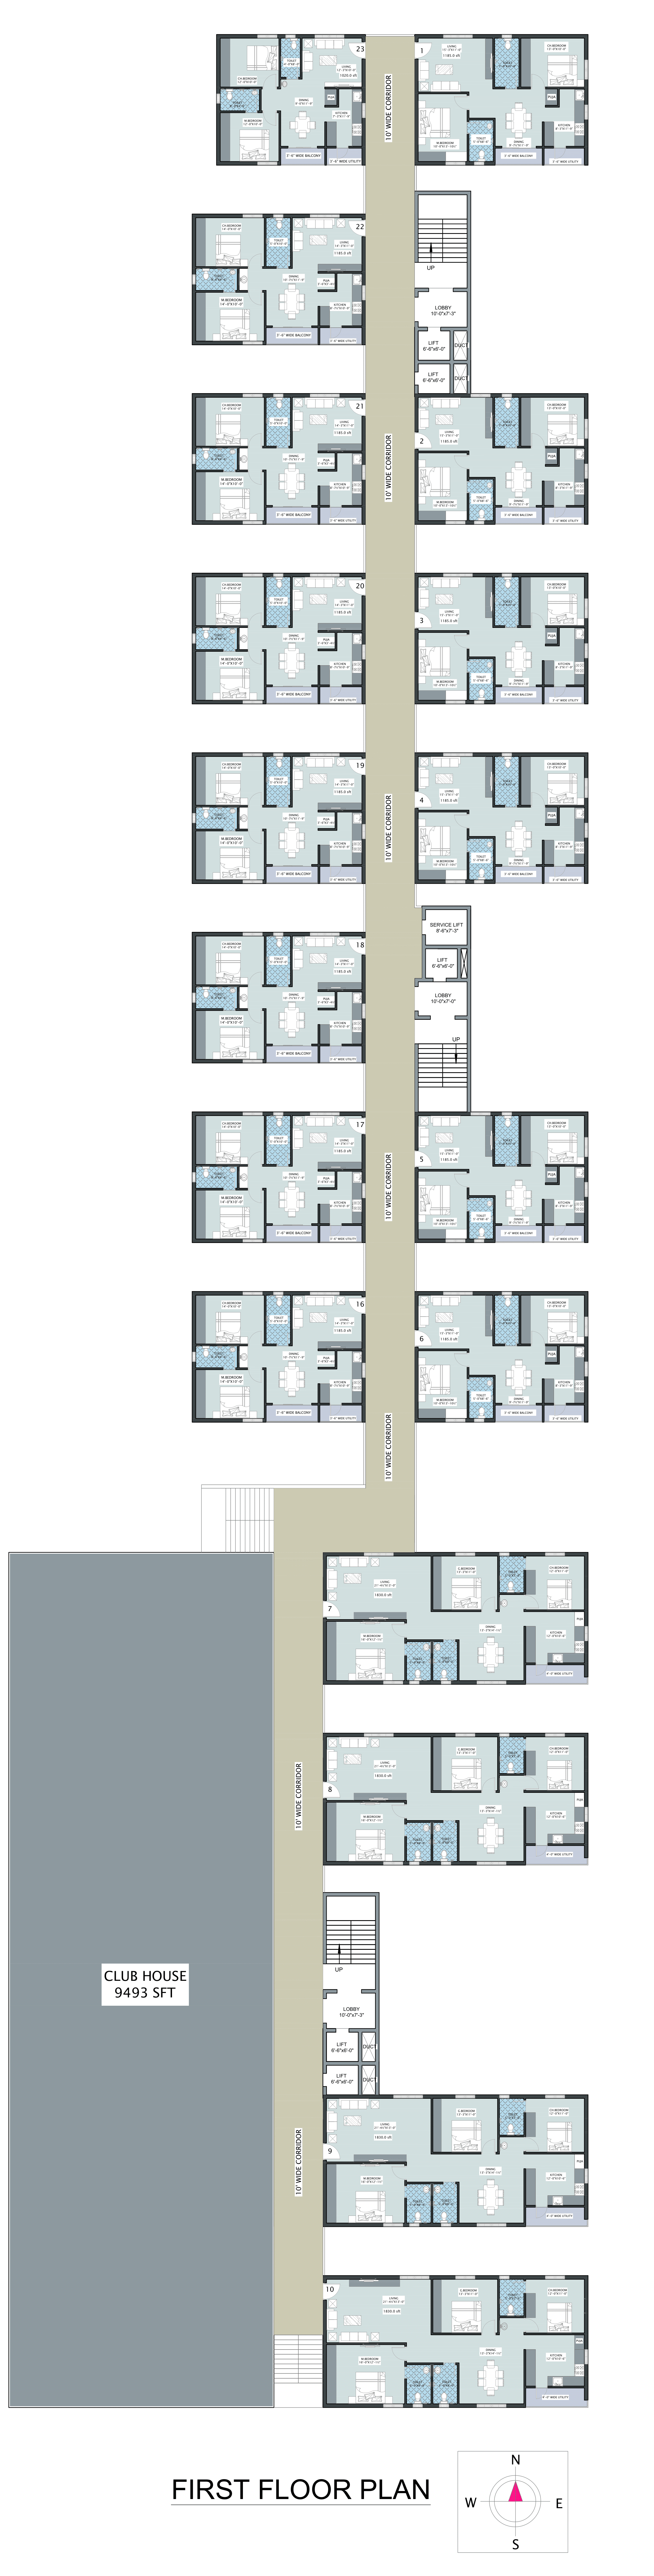 Layout for 1st floor